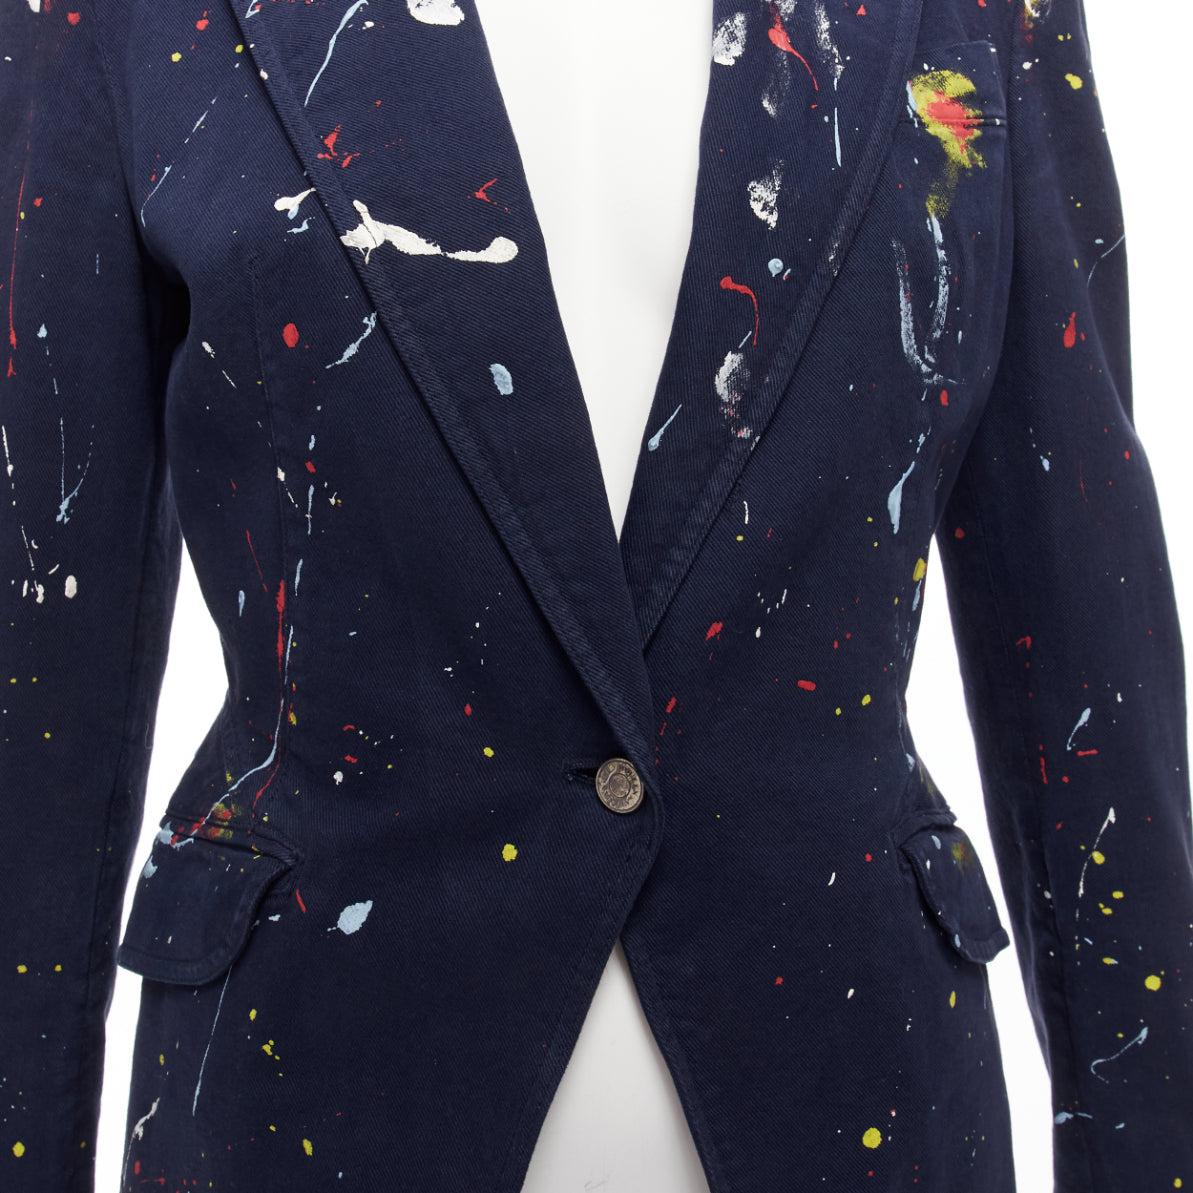 ALEXANDER MCQUEEN 2010 Runway navy paint splattered fitted blazer jacket IT42 M
Reference: DYTG/A00018
Brand: Alexander McQueen
Designer: Lee Alexander McQueen
Collection: Resort 2010 - Runway
Material: Cotton, Blend
Color: Navy,